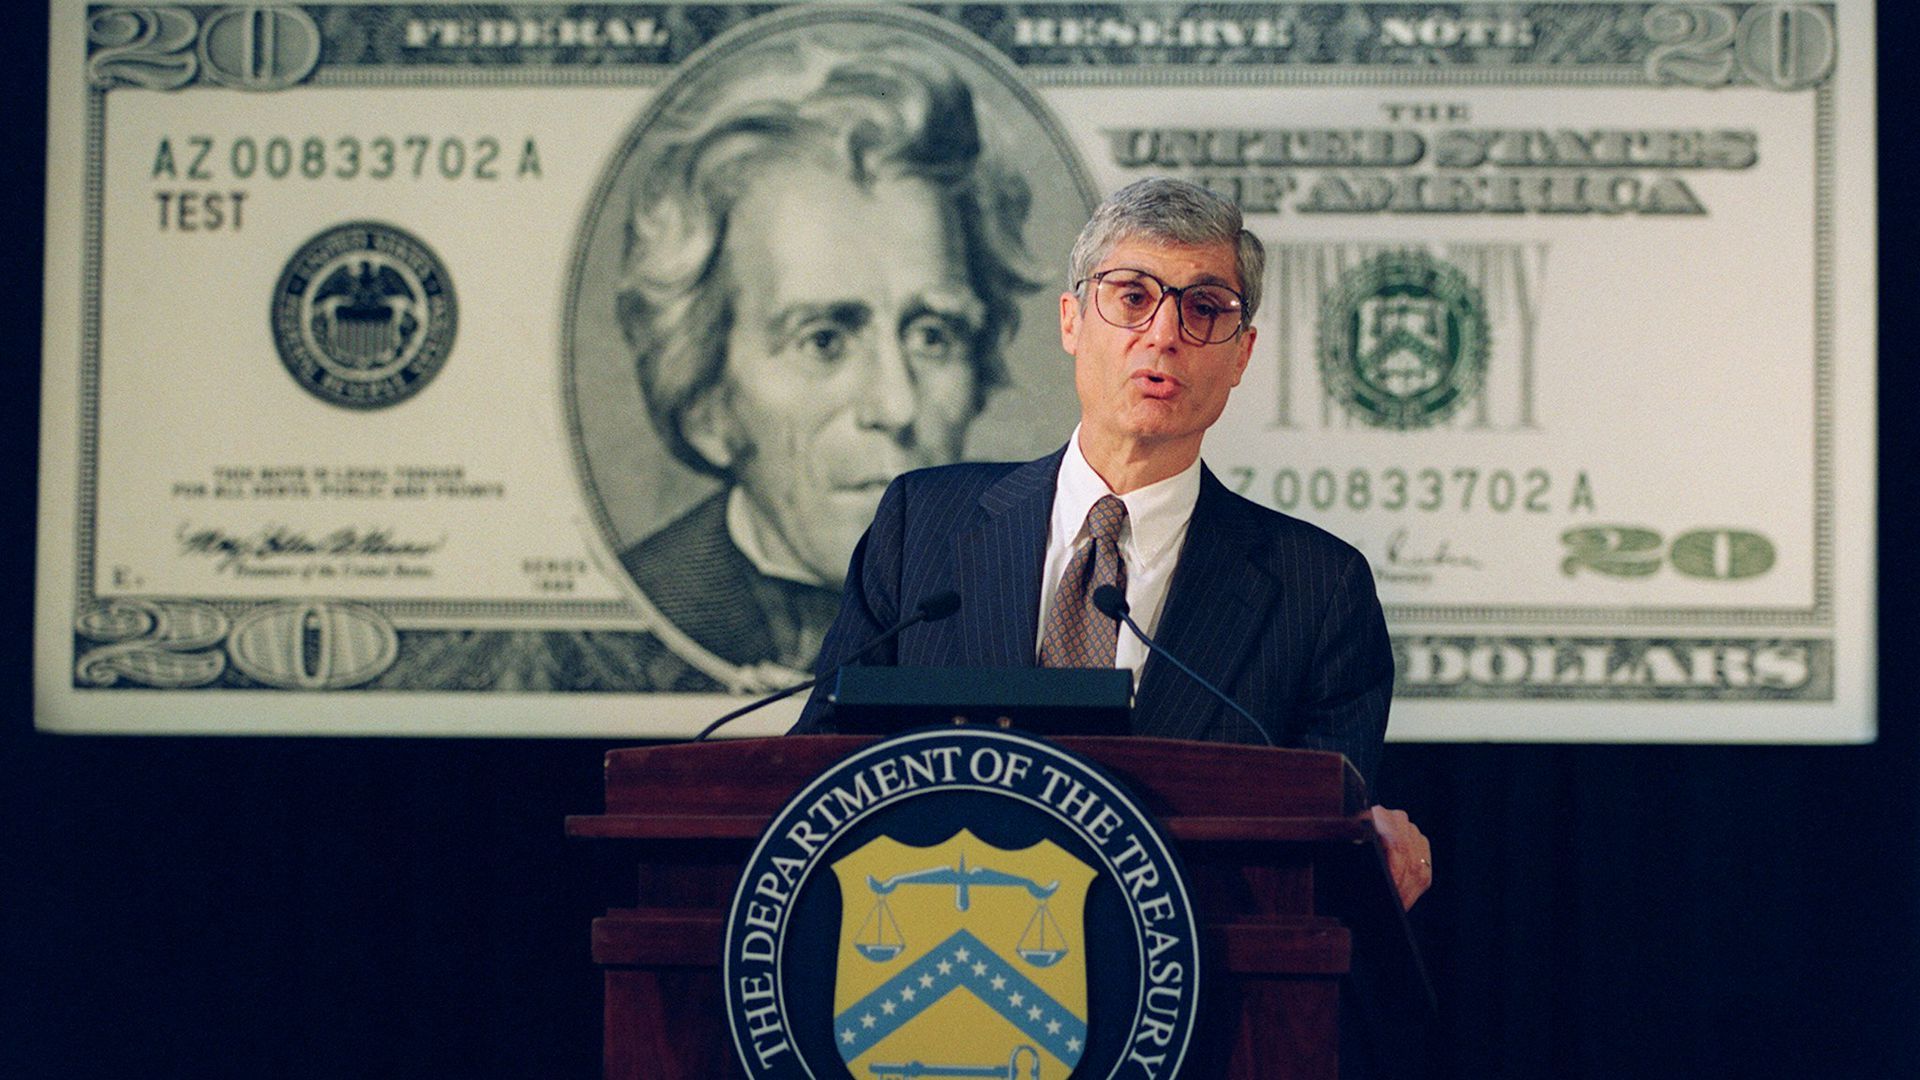 Photo of a bespectacled person wearing a suit and speaking from a podium